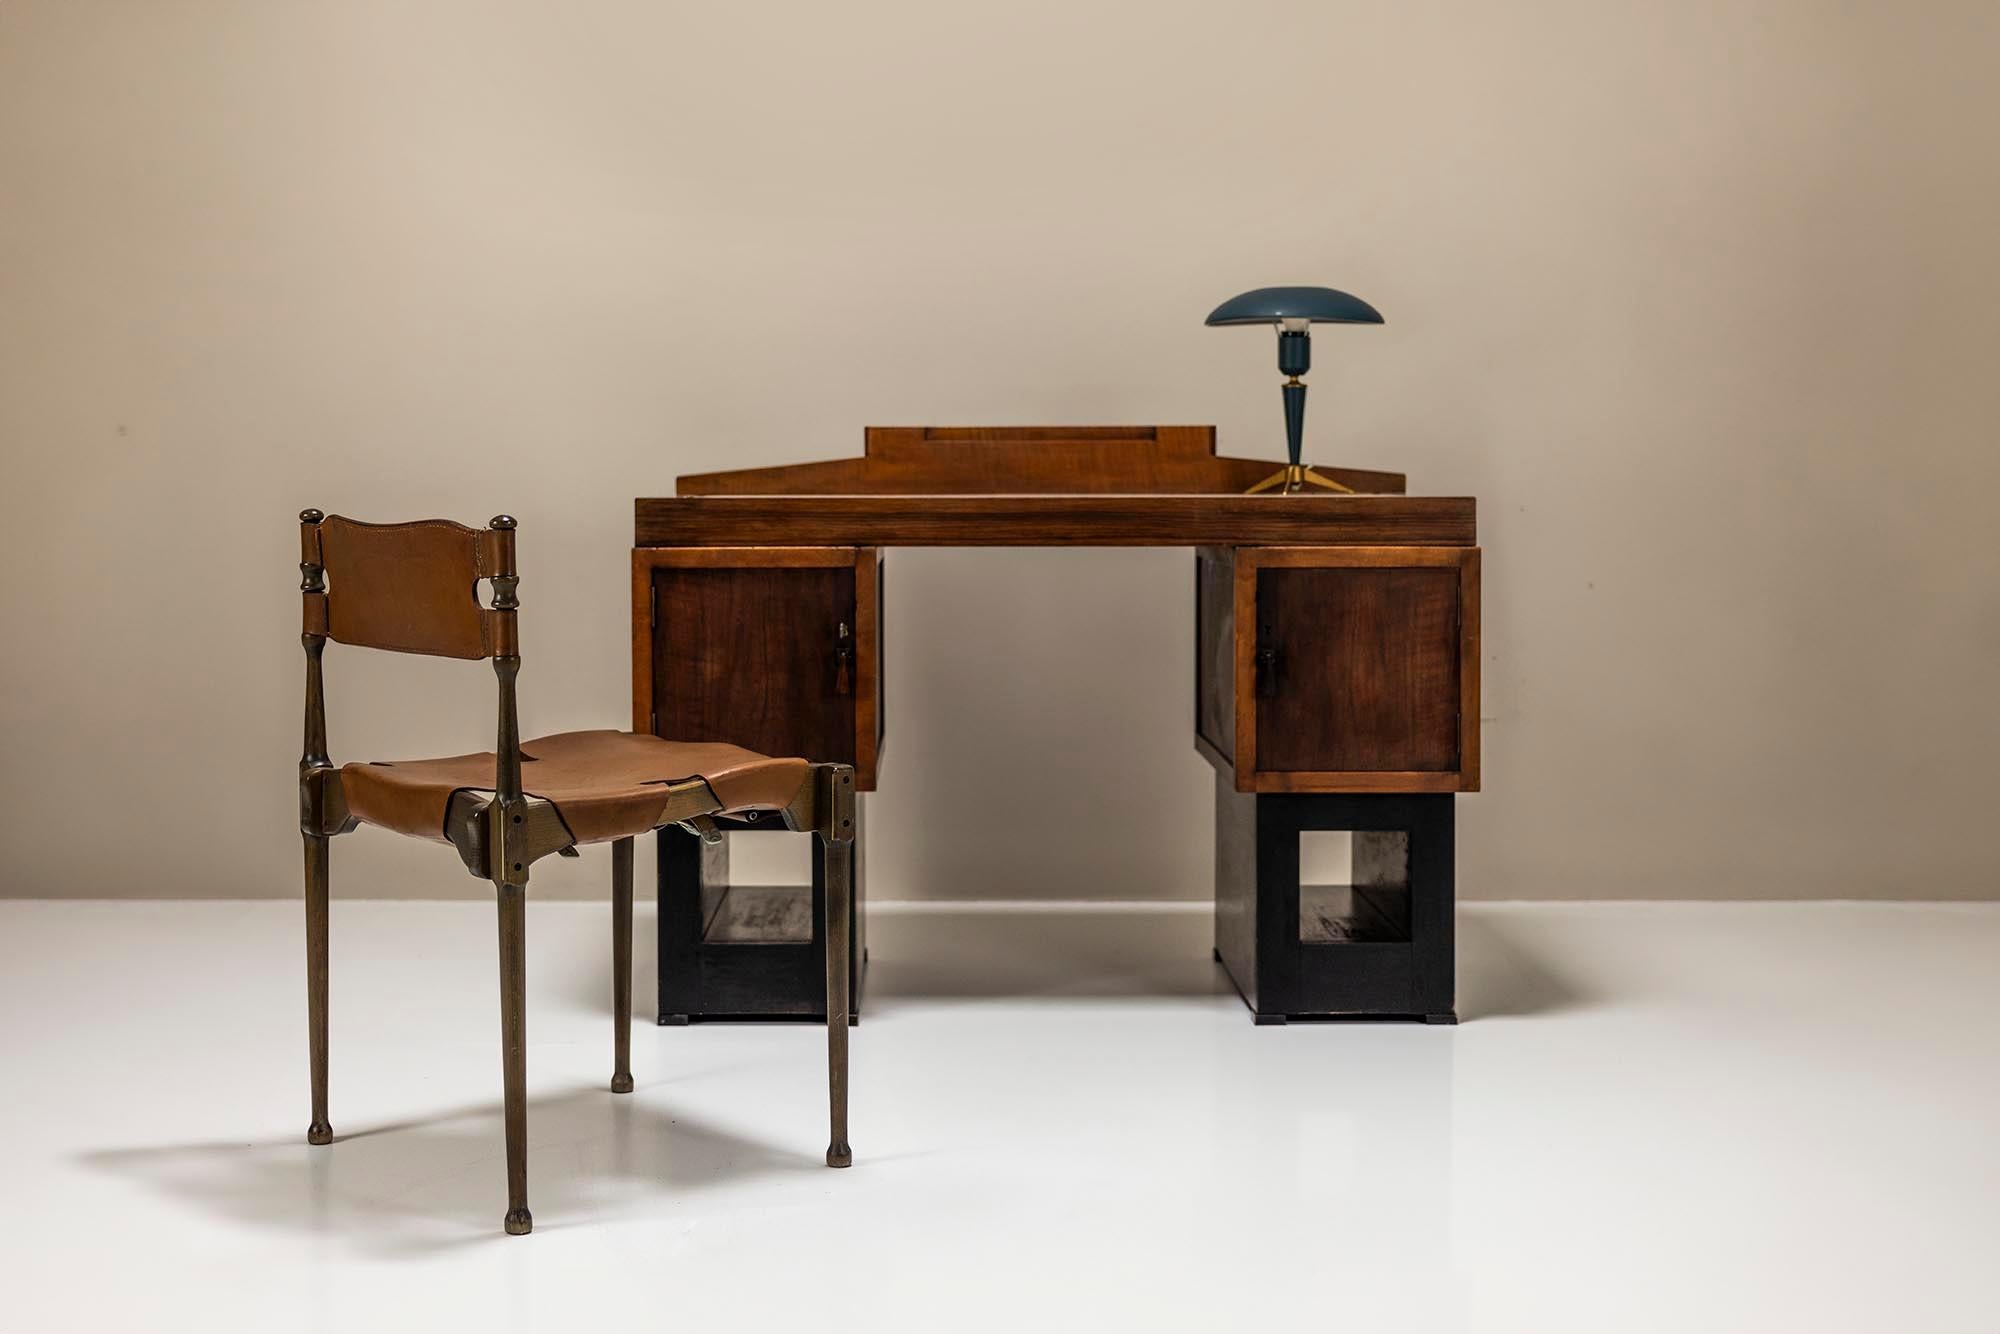 This desk is most probably designed by the Dutch architect and furniture designer Anton Hamaker. He has more than four hundred buildings to his name and in addition to being an architect, he was also a sought-after furniture designer. Hamaker was